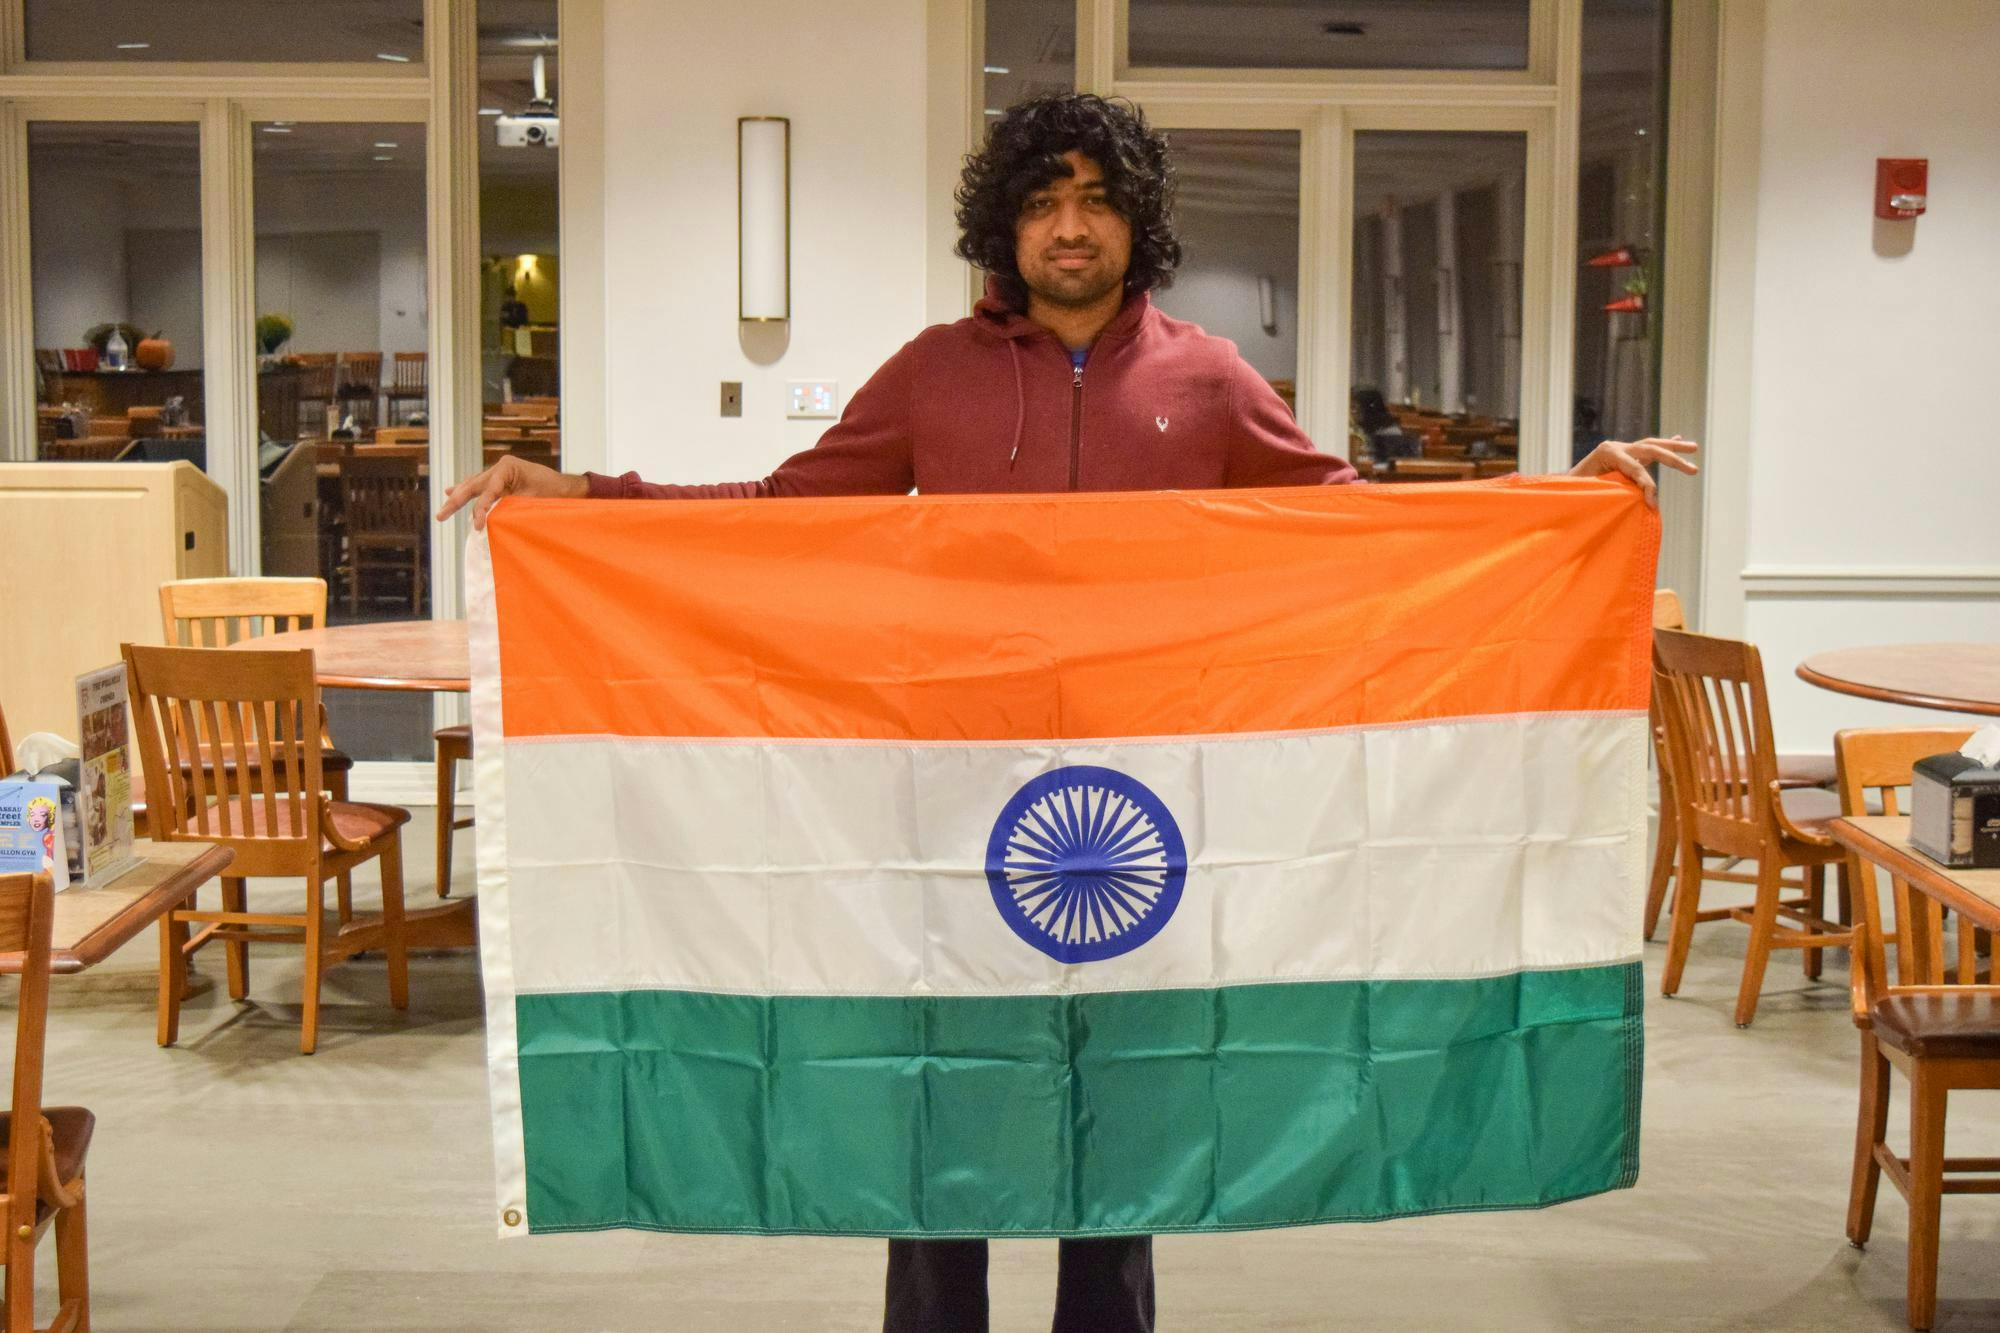 Student in the center holds the flag of India.